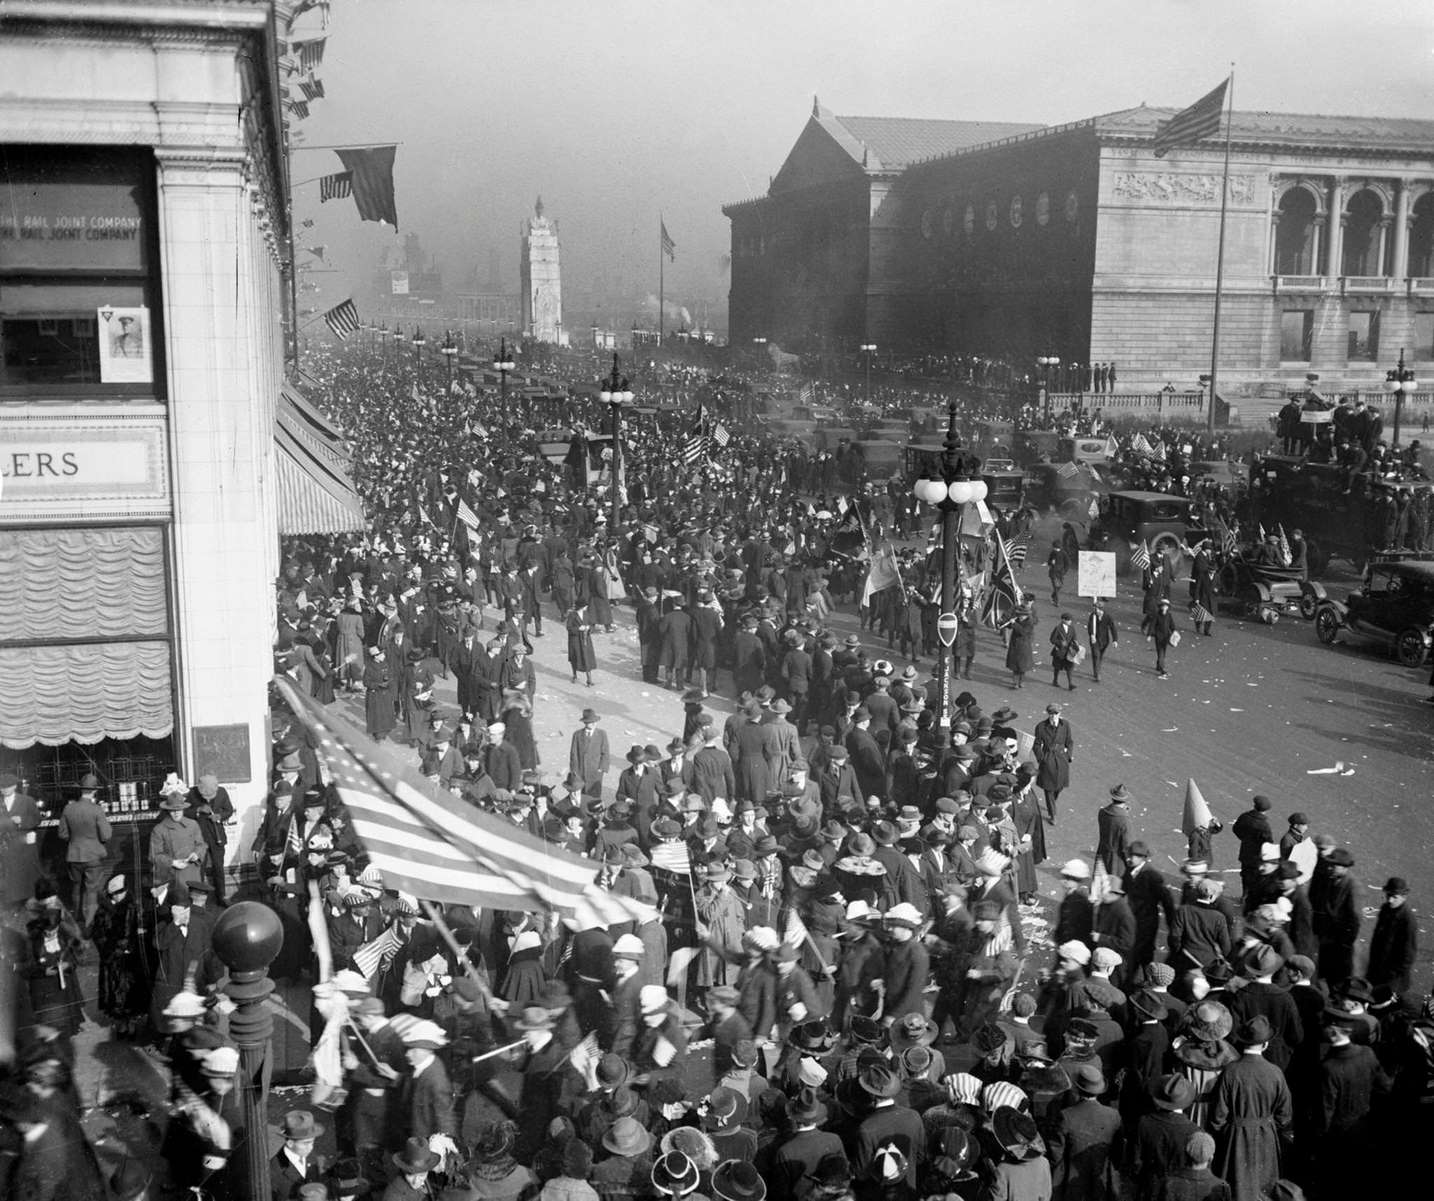 Crowds at the Armistice Day peace celebration marching in front of the Art Institute at 111 South Michigan Avenue in the Loop community area of Chicago, Illinois, 1918.